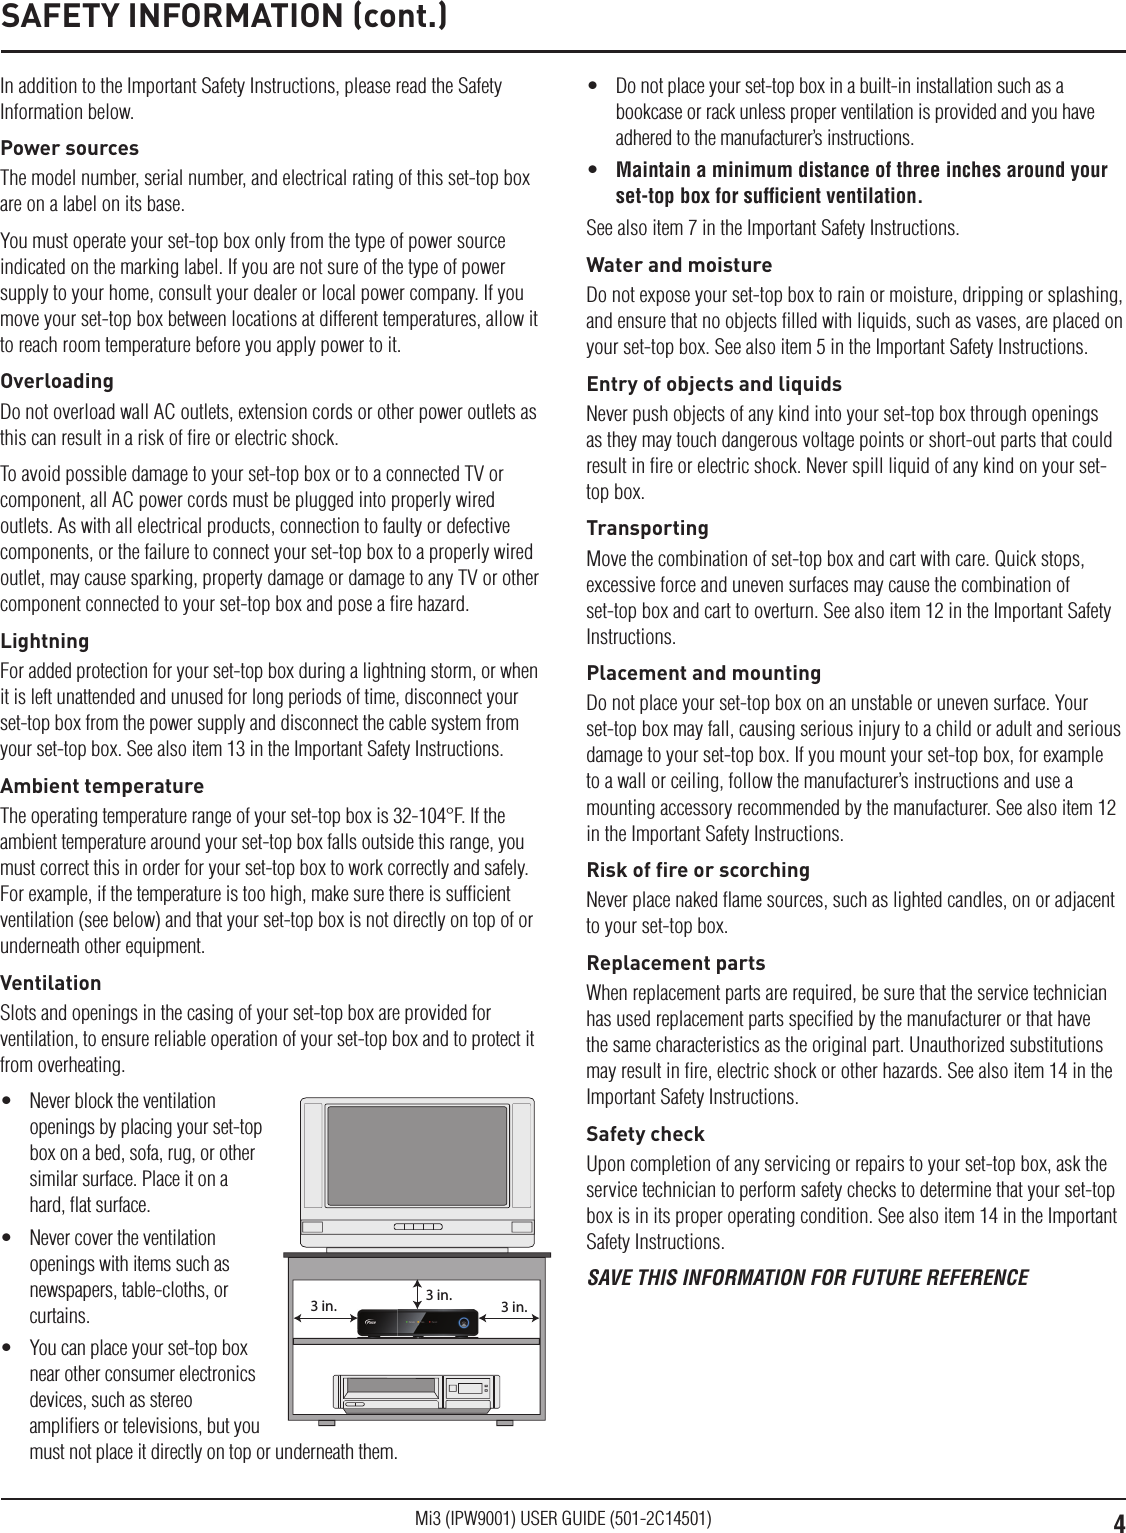 4Mi3 (IPW9001) USER GUIDE (501-2C14501)In addition to the Important Safety Instructions, please read the Safety Information below.Power sourcesThe model number, serial number, and electrical rating of this set-top box are on a label on its base.You must operate your set-top box only from the type of power source indicated on the marking label. If you are not sure of the type of power supply to your home, consult your dealer or local power company. If you move your set-top box between locations at different temperatures, allow it to reach room temperature before you apply power to it.OverloadingDo not overload wall AC outlets, extension cords or other power outlets as this can result in a risk of ﬁre or electric shock.To avoid possible damage to your set-top box or to a connected TV or component, all AC power cords must be plugged into properly wired outlets. As with all electrical products, connection to faulty or defective components, or the failure to connect your set-top box to a properly wired outlet, may cause sparking, property damage or damage to any TV or other component connected to your set-top box and pose a ﬁre hazard.LightningFor added protection for your set-top box during a lightning storm, or when it is left unattended and unused for long periods of time, disconnect your set-top box from the power supply and disconnect the cable system from your set-top box. See also item 13 in the Important Safety Instructions.Ambient temperatureThe operating temperature range of your set-top box is 32-104°F. If the ambient temperature around your set-top box falls outside this range, you must correct this in order for your set-top box to work correctly and safely. For example, if the temperature is too high, make sure there is sufﬁcient ventilation (see below) and that your set-top box is not directly on top of or underneath other equipment.VentilationSlots and openings in the casing of your set-top box are provided for ventilation, to ensure reliable operation of your set-top box and to protect it from overheating.•  Never block the ventilation openings by placing your set-top box on a bed, sofa, rug, or other similar surface. Place it on a hard, ﬂat surface.•  Never cover the ventilation openings with items such as newspapers, table-cloths, or curtains.•  You can place your set-top box near other consumer electronics devices, such as stereo ampliﬁers or televisions, but you must not place it directly on top or underneath them.3 in.3 in.3 in.•  Do not place your set-top box in a built-in installation such as a bookcase or rack unless proper ventilation is provided and you have adhered to the manufacturer’s instructions.•  Maintain a minimum distance of three inches around your set-top box for sufﬁcient ventilation.See also item 7 in the Important Safety Instructions.Water and moistureDo not expose your set-top box to rain or moisture, dripping or splashing, and ensure that no objects ﬁlled with liquids, such as vases, are placed on your set-top box. See also item 5 in the Important Safety Instructions.Entry of objects and liquidsNever push objects of any kind into your set-top box through openings as they may touch dangerous voltage points or short-out parts that could result in ﬁre or electric shock. Never spill liquid of any kind on your set-top box.TransportingMove the combination of set-top box and cart with care. Quick stops, excessive force and uneven surfaces may cause the combination of set-top box and cart to overturn. See also item 12 in the Important Safety Instructions.Placement and mountingDo not place your set-top box on an unstable or uneven surface. Your set-top box may fall, causing serious injury to a child or adult and serious damage to your set-top box. If you mount your set-top box, for example to a wall or ceiling, follow the manufacturer’s instructions and use a mounting accessory recommended by the manufacturer. See also item 12 in the Important Safety Instructions.Risk of ﬁre or scorchingNever place naked ﬂame sources, such as lighted candles, on or adjacent to your set-top box.Replacement partsWhen replacement parts are required, be sure that the service technician has used replacement parts speciﬁed by the manufacturer or that have the same characteristics as the original part. Unauthorized substitutions may result in ﬁre, electric shock or other hazards. See also item 14 in the Important Safety Instructions.Safety checkUpon completion of any servicing or repairs to your set-top box, ask the service technician to perform safety checks to determine that your set-top box is in its proper operating condition. See also item 14 in the Important Safety Instructions.SAVE THIS INFORMATION FOR FUTURE REFERENCESAFETY INFORMATION (cont.)